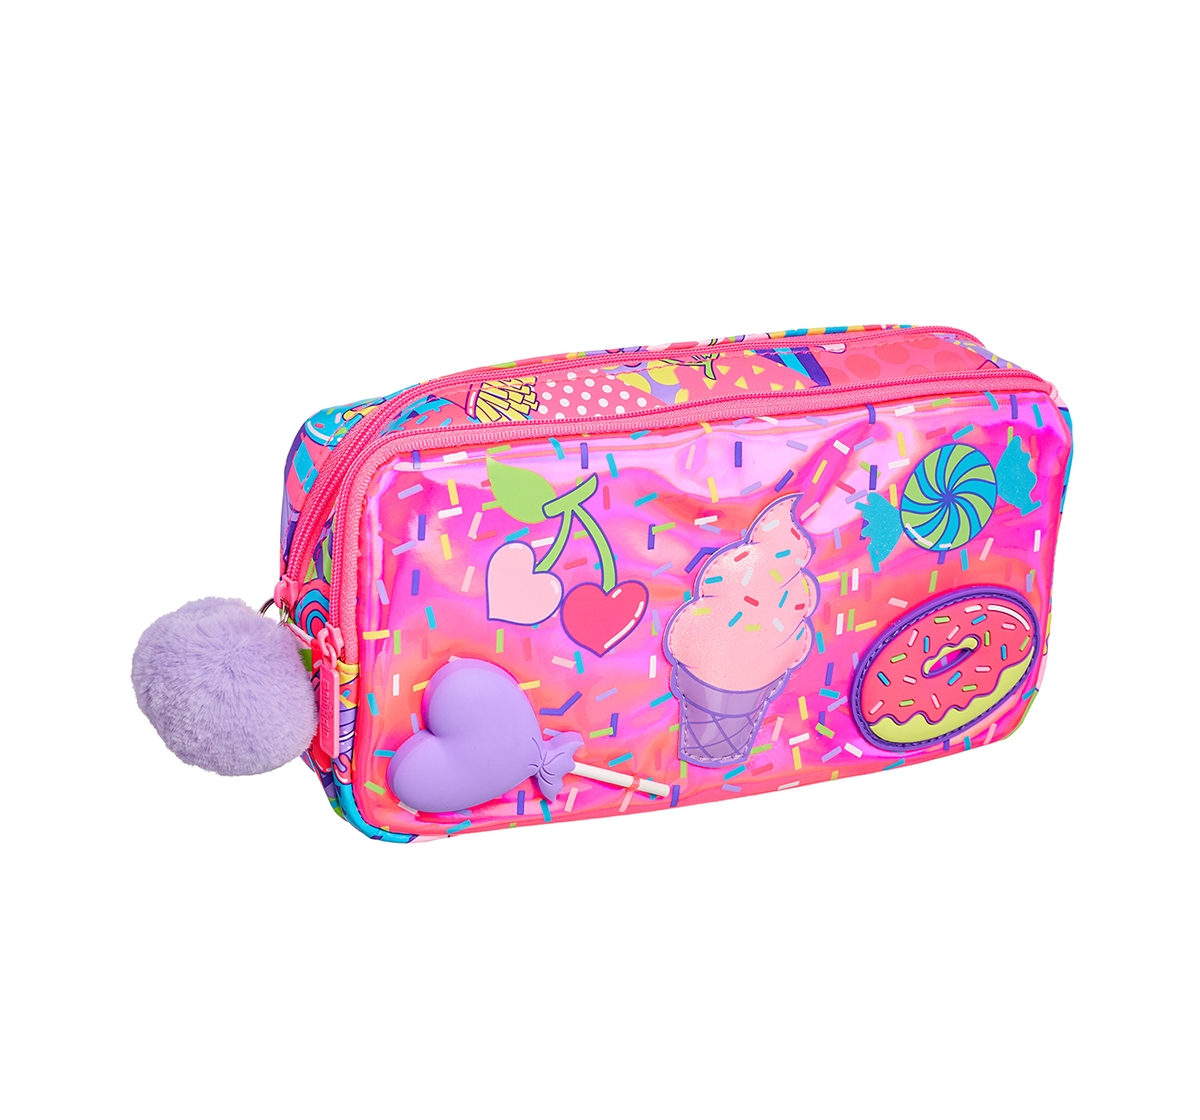 Smiggle | Smiggle Far Away Character Pencil Case - Ice-cream Print Bags for Kids age 3Y+ (Pink) 0